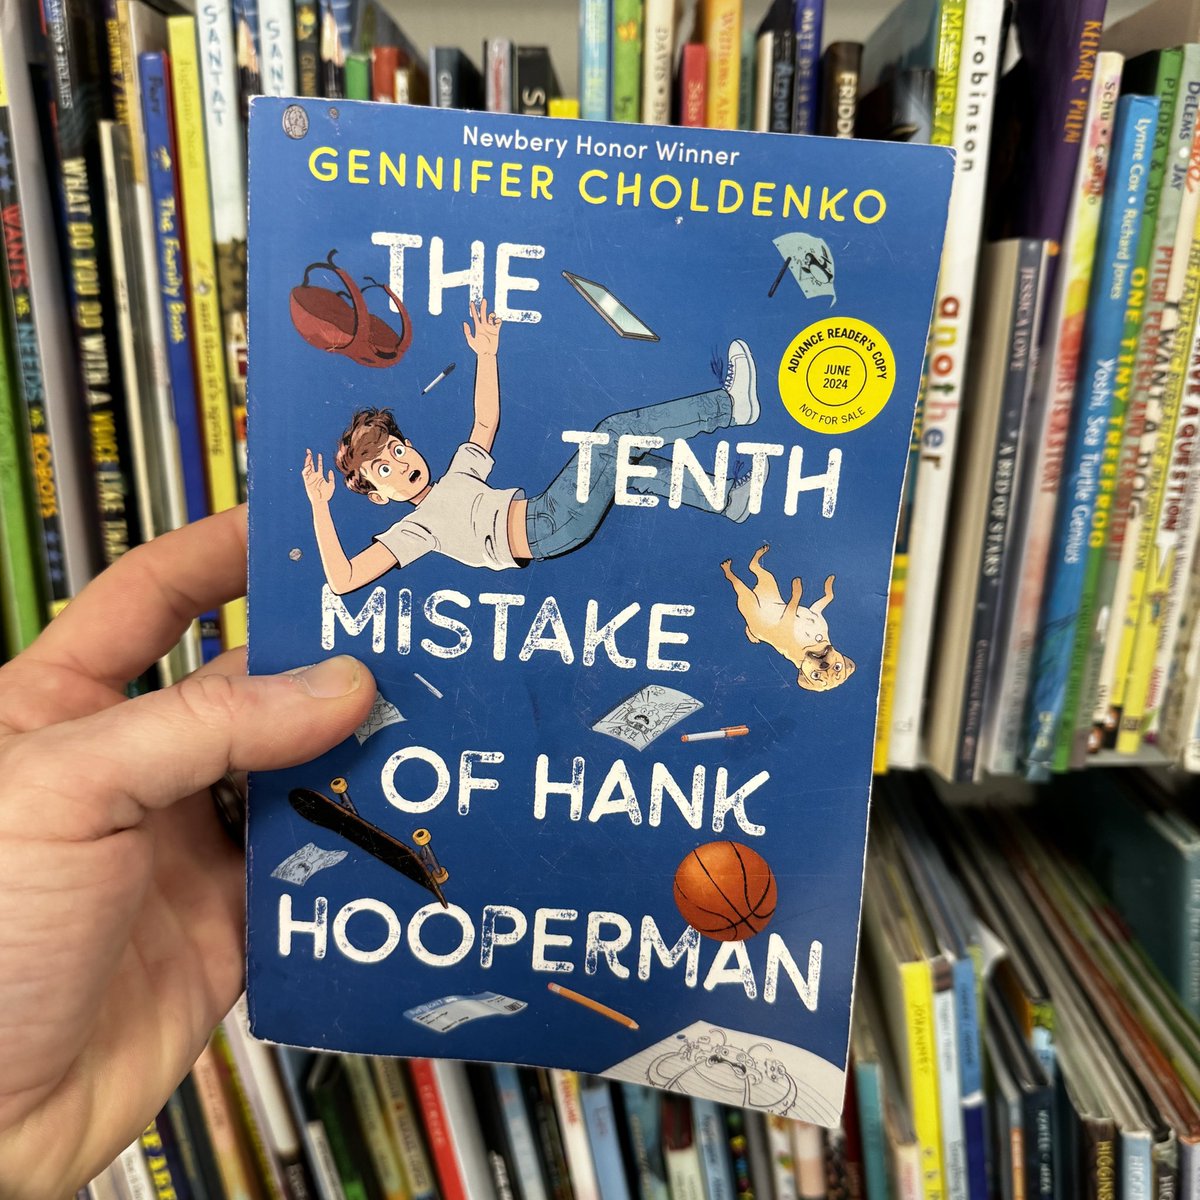 The Tenth Mistake of Hank Hooperman is phenomenal. Hank is one of those characters that you went to tell everyone about. Kids are going to fall hard for this one. A must read. One of the best books of 2024. Feels like one of those books that find themselves on 20+ state award